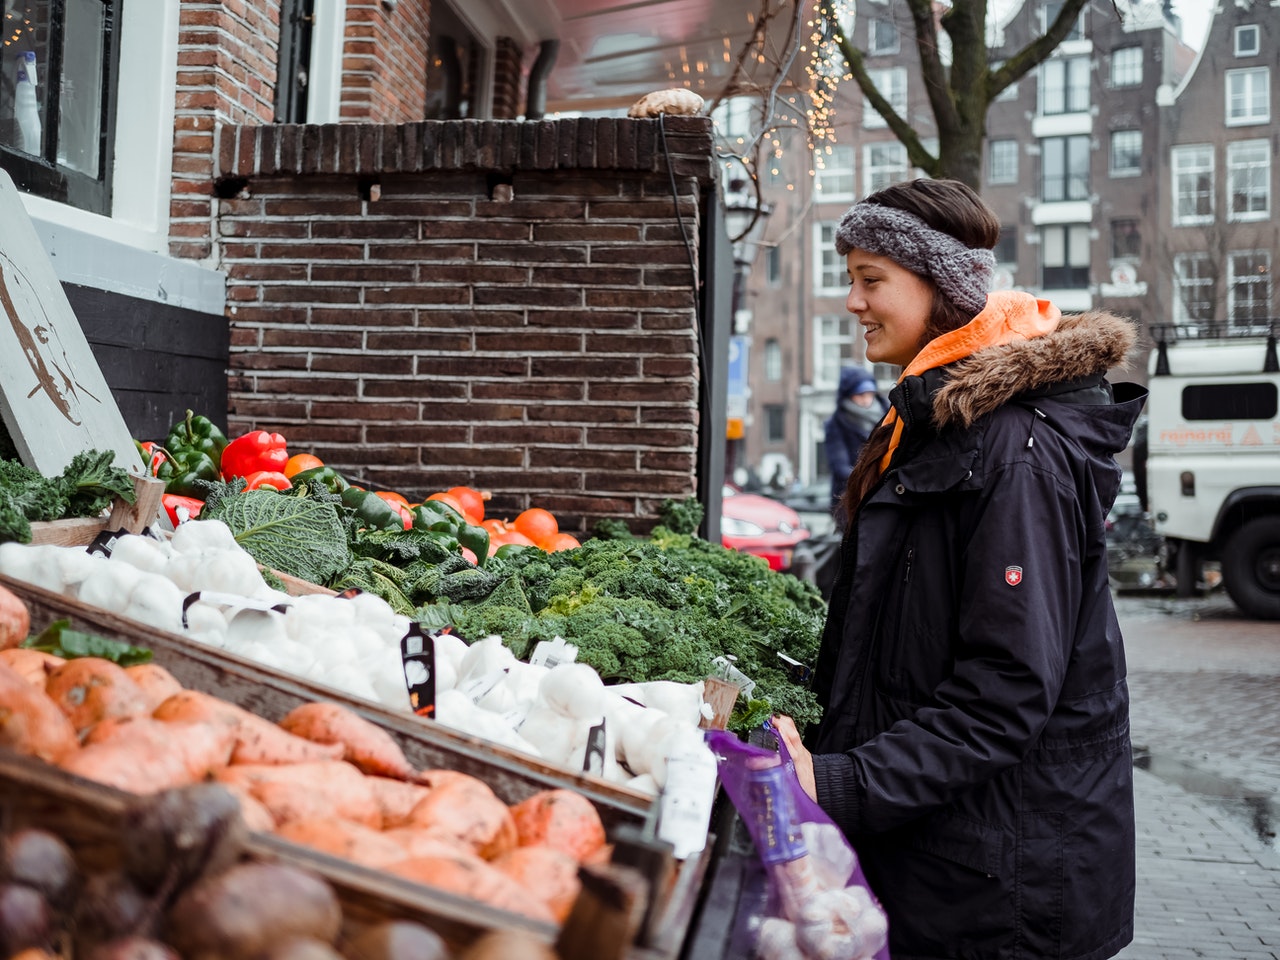 woman shopping for local groceries on street market